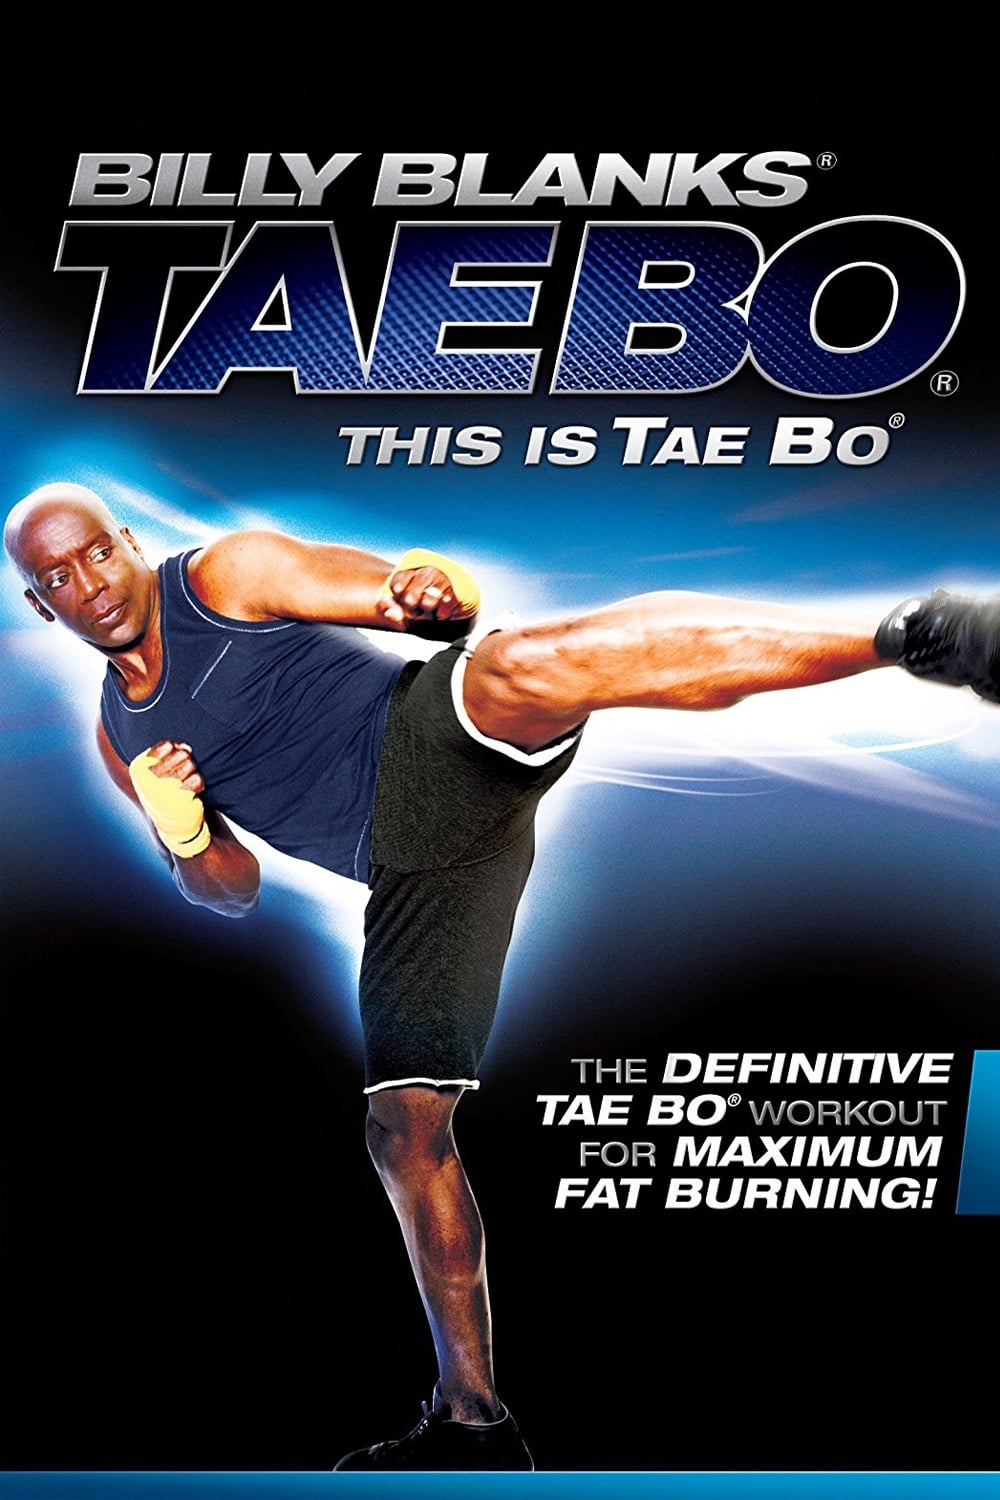 Billy Blanks: This Is Tae Bo